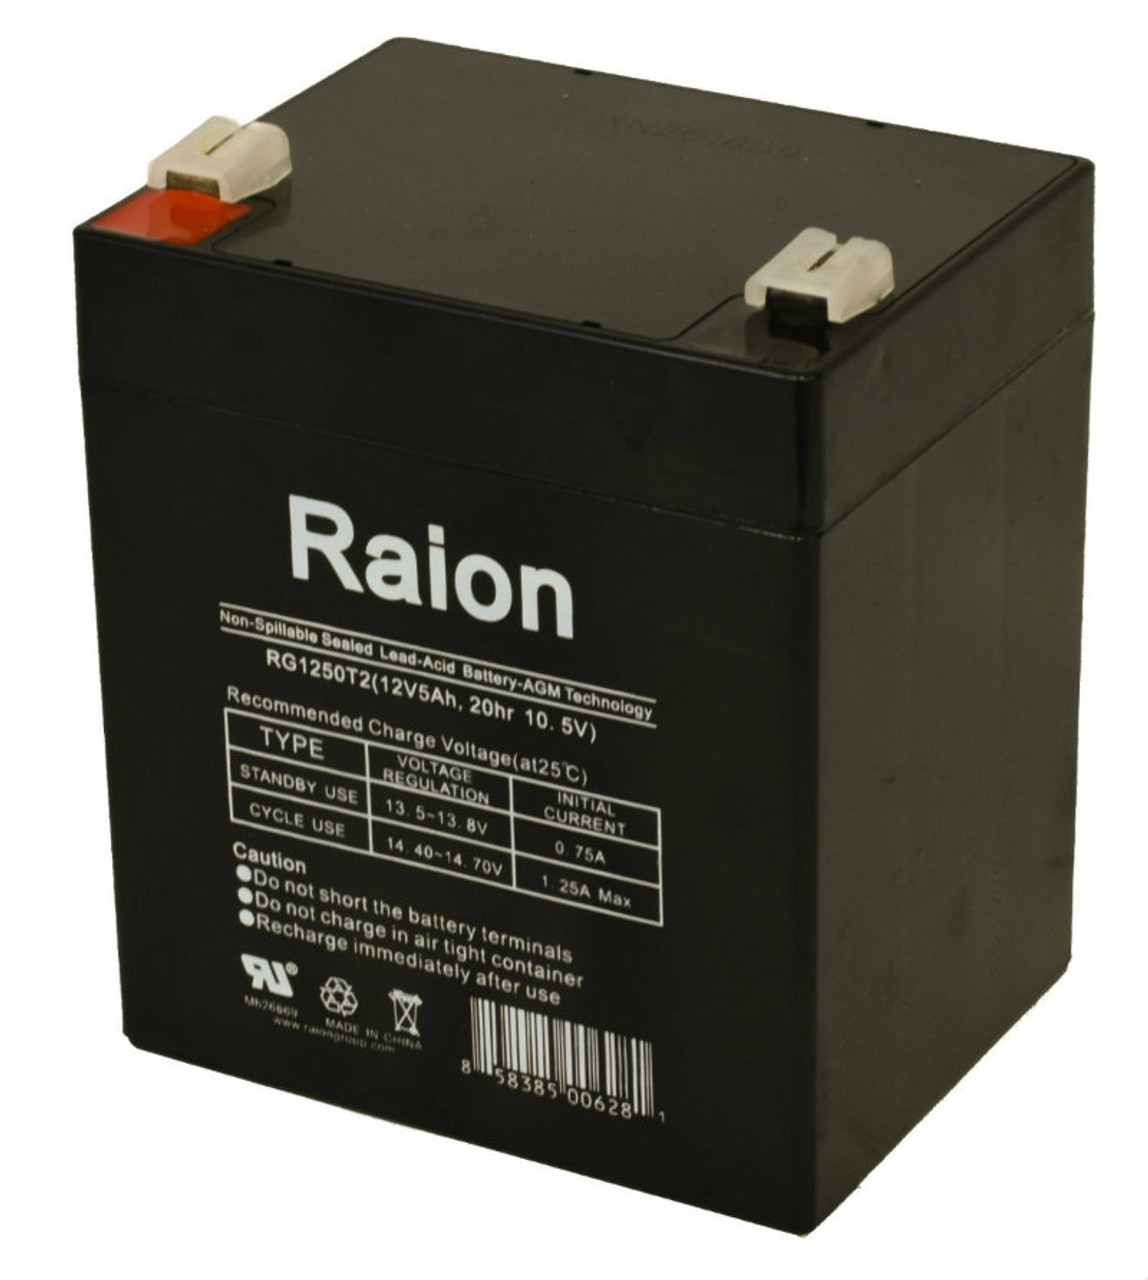 Raion Power 12V 5Ah Replacement Fire Alarm Control Panel Battery for Ansul Alarms